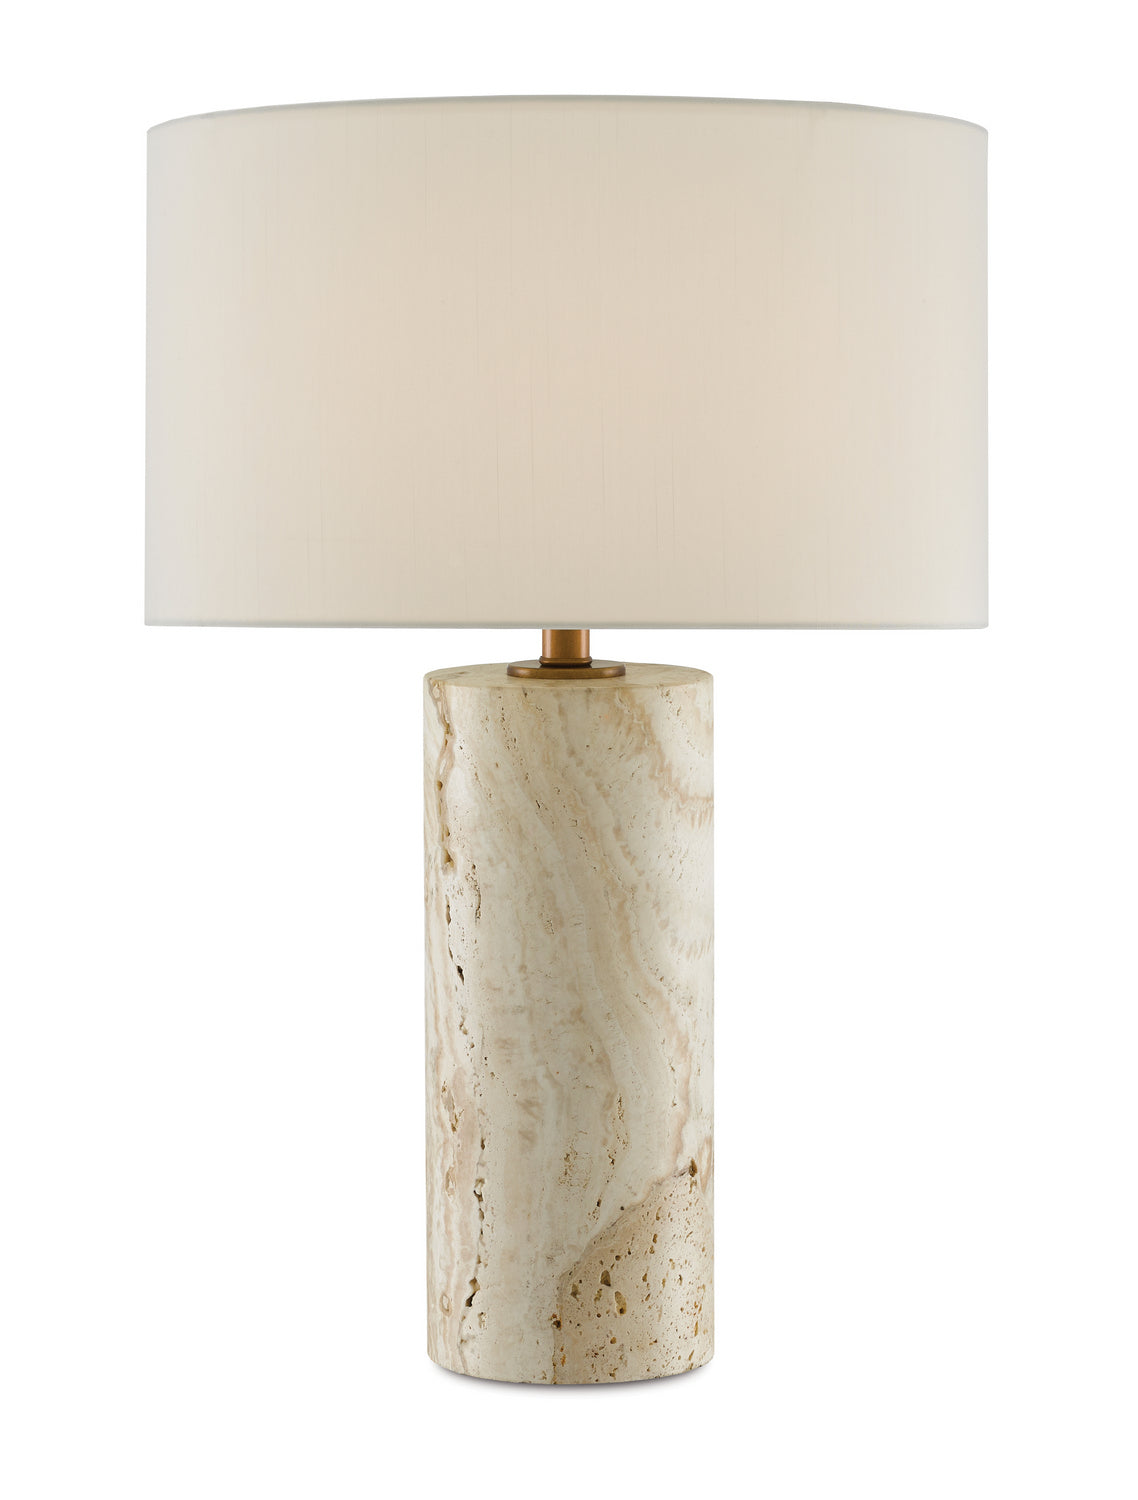 One Light Table Lamp from the Vespera collection in Antique Brass finish